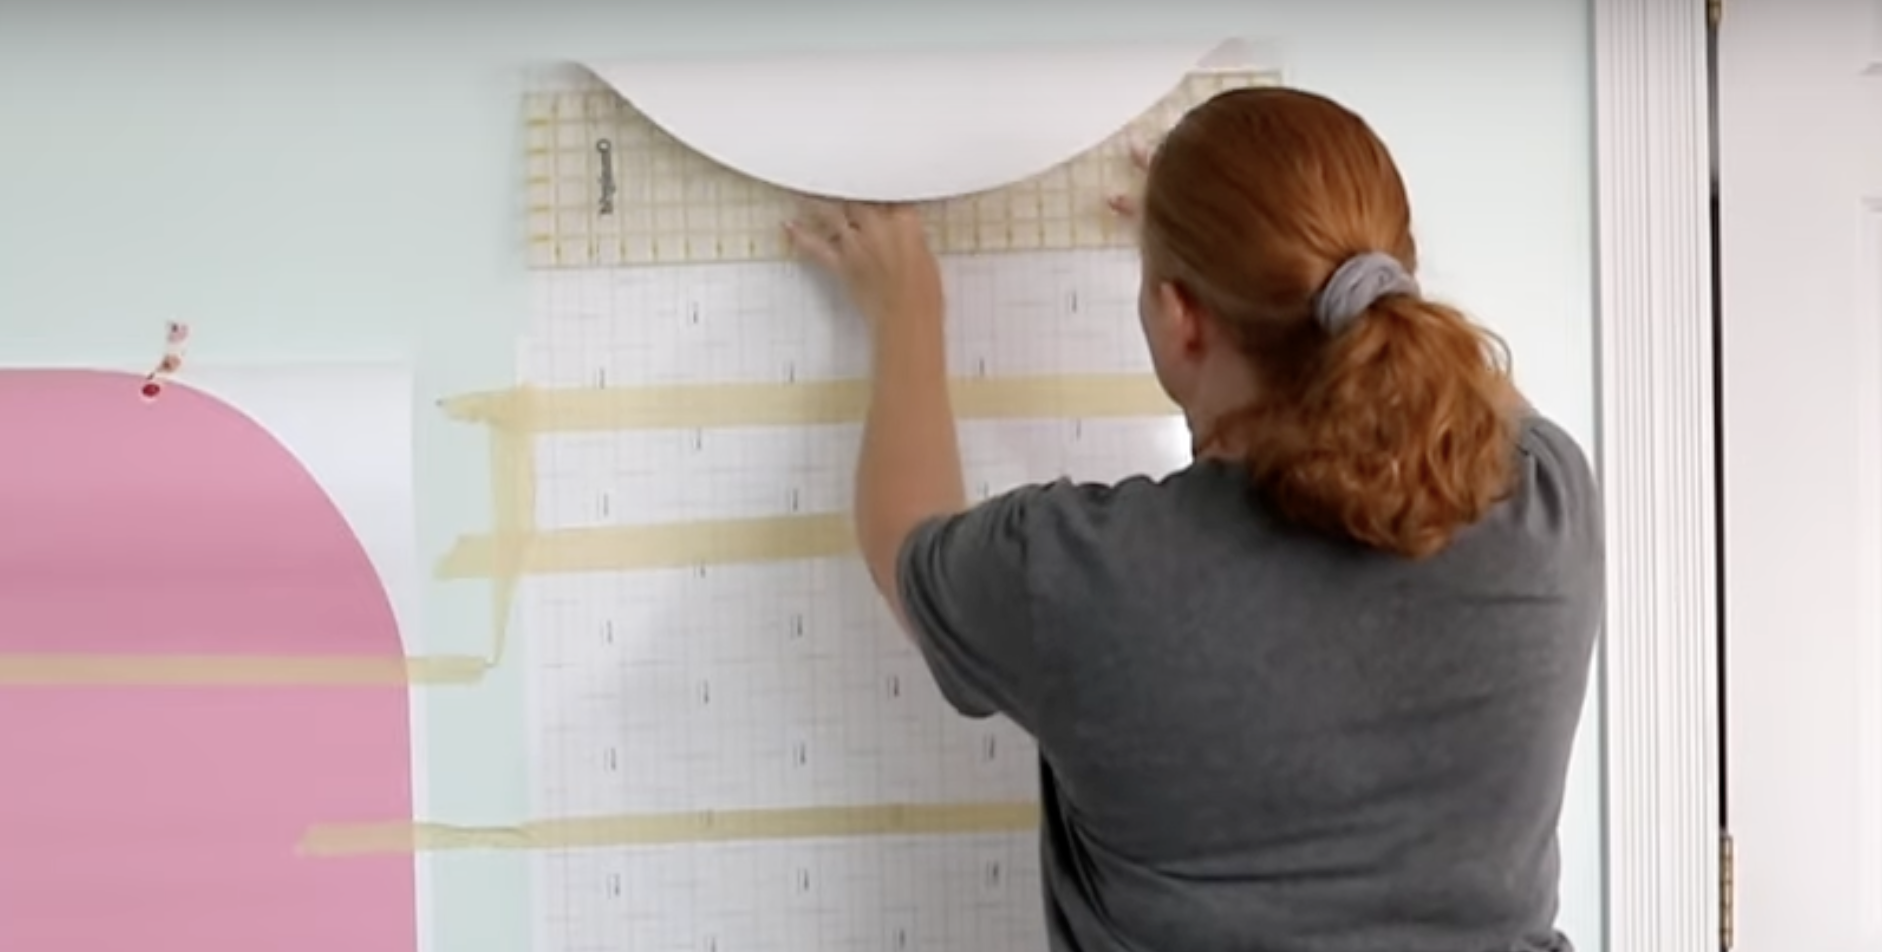 Use quilting ruler to smooth decal onto wall.